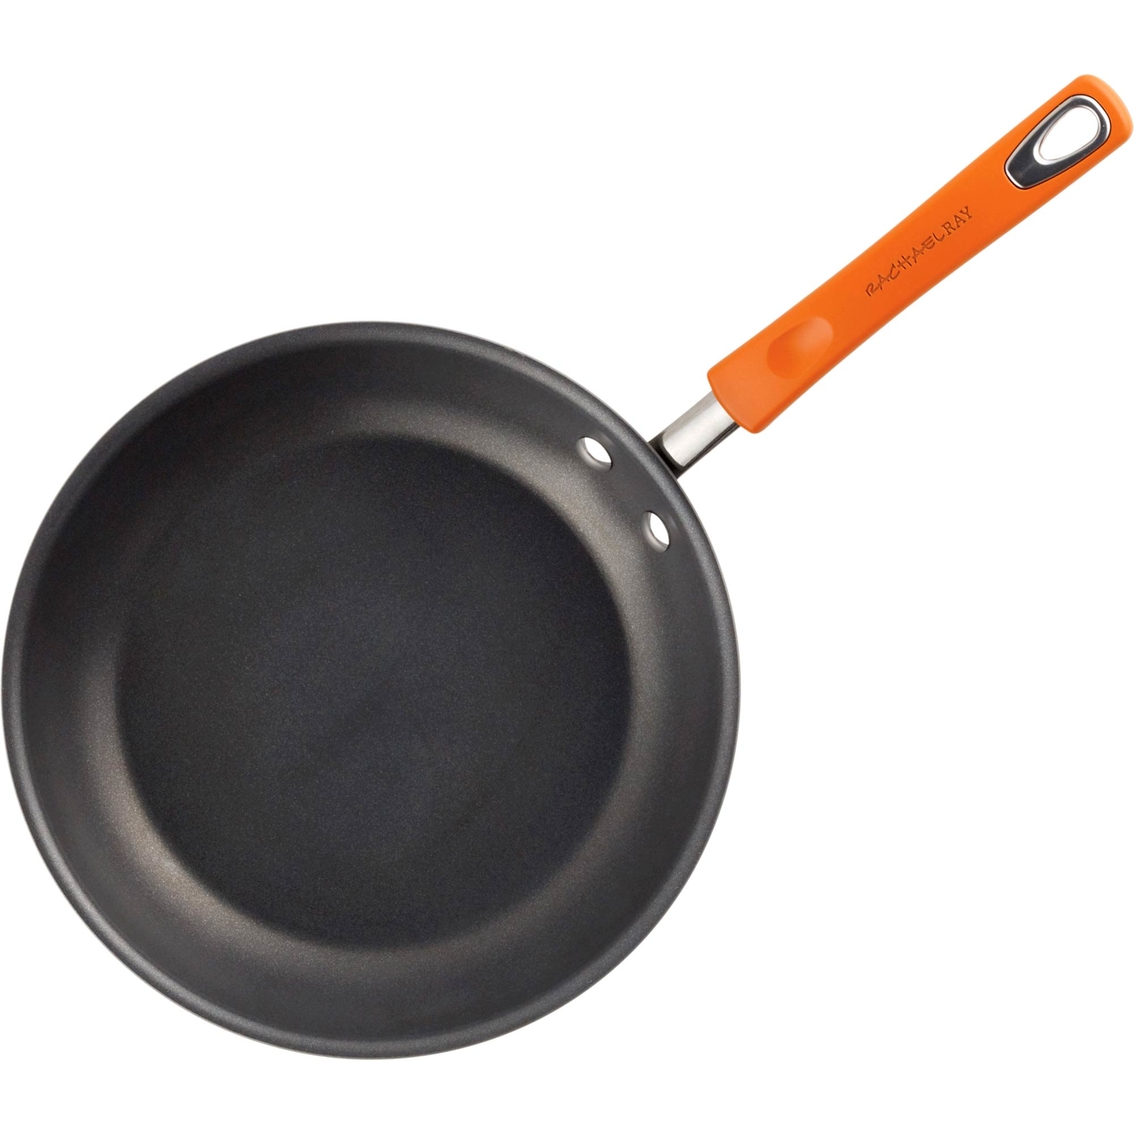 Rachael Ray Hard Anodized Nonstick 10 In. Skillet - Image 2 of 4